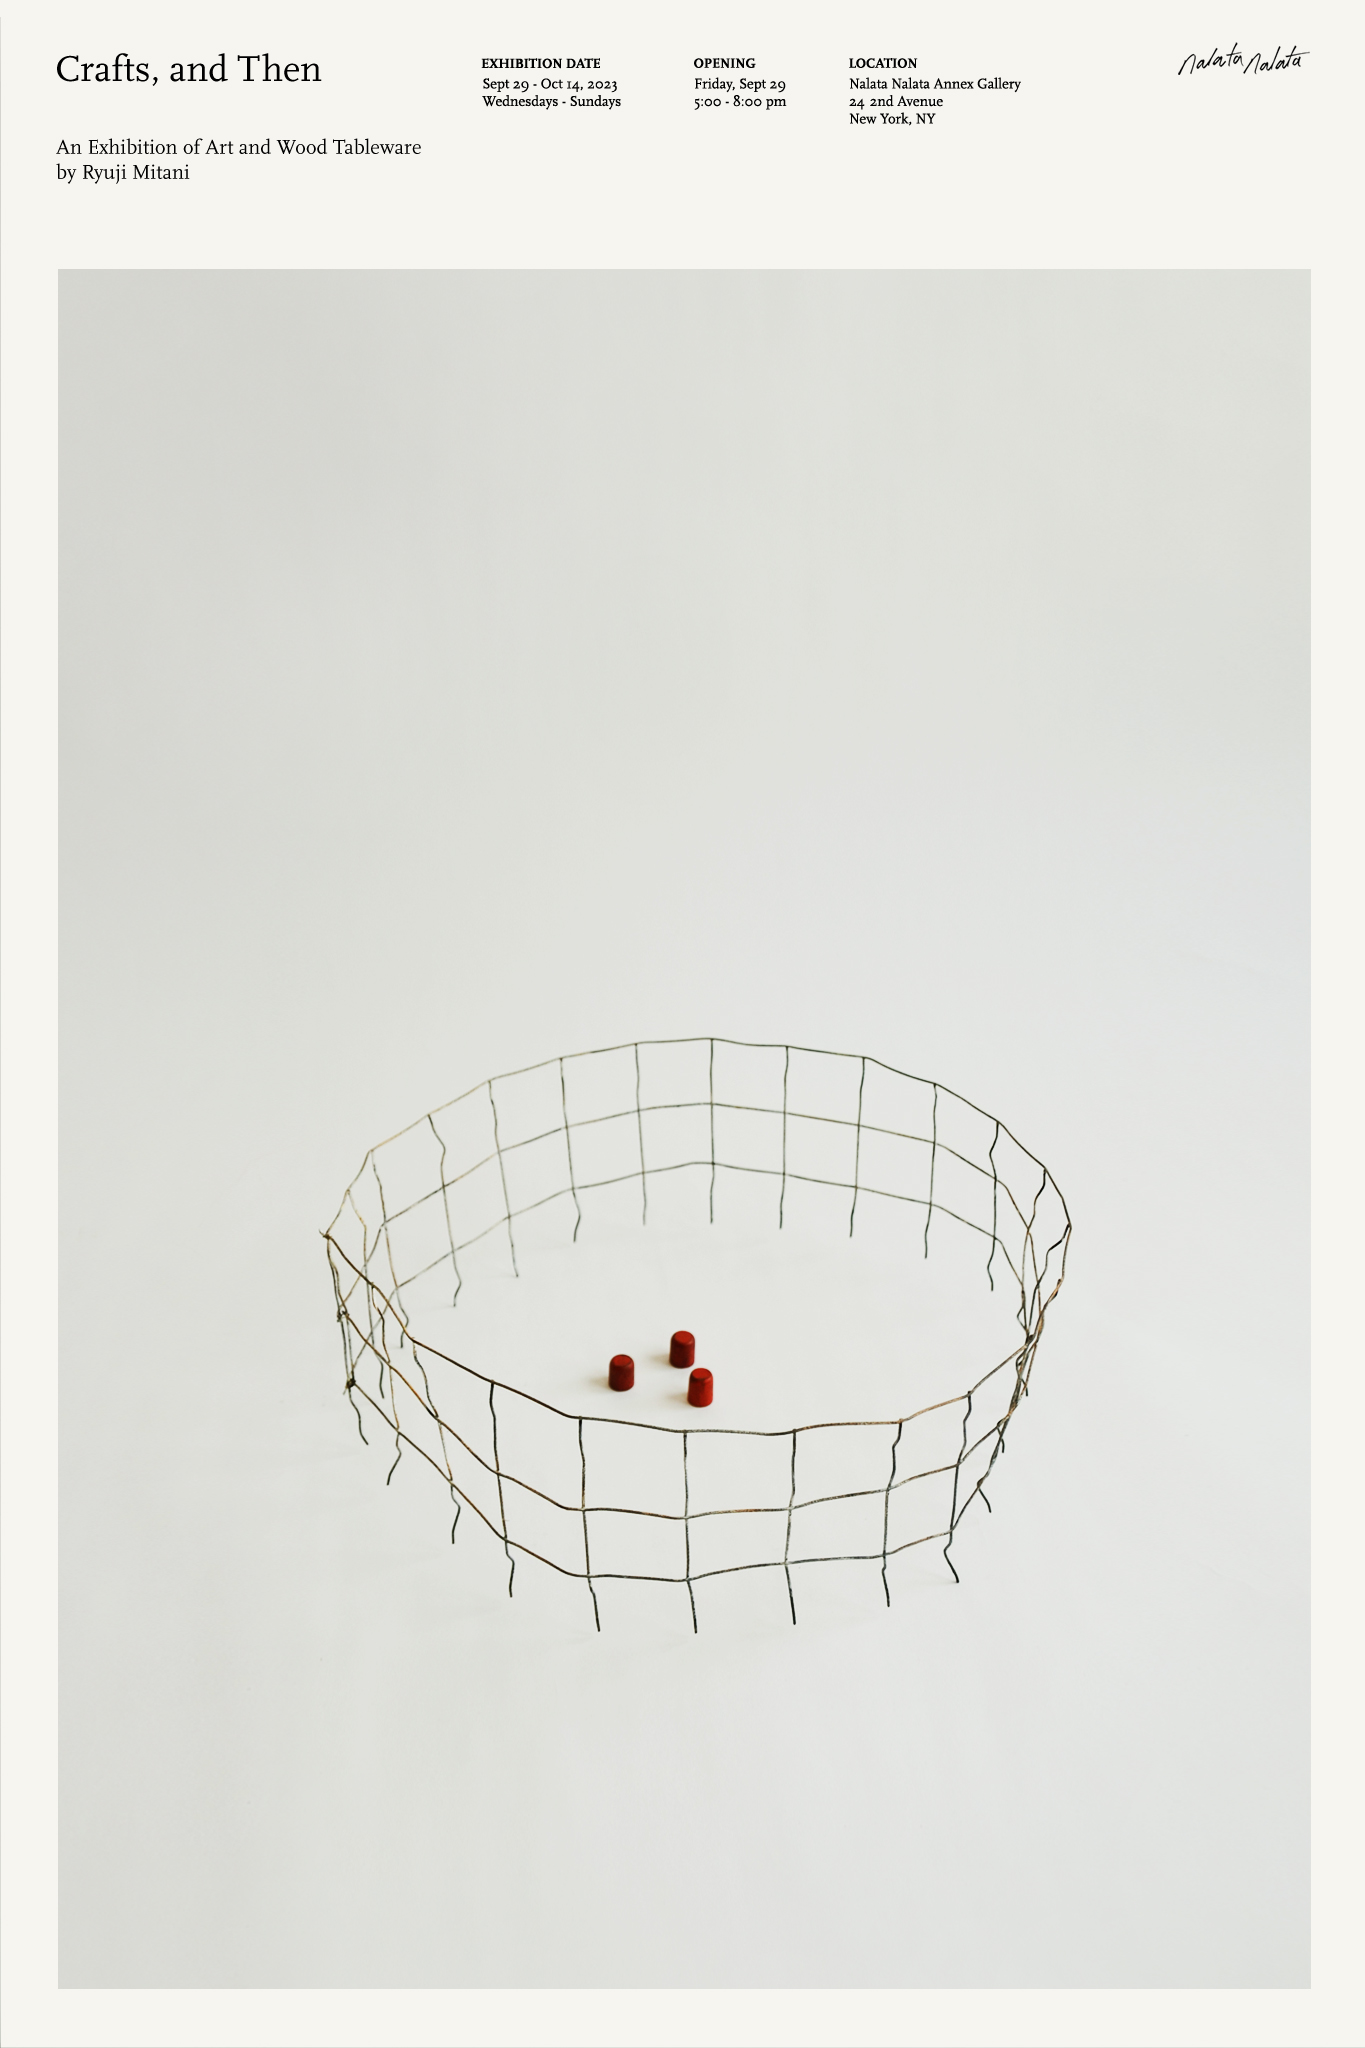 Poster of the Ryuji Mitani Crafts, and Then Exhibition held at Nalata Nalata featuring artwork of a circular wire cage with three red wood nubs in the middle